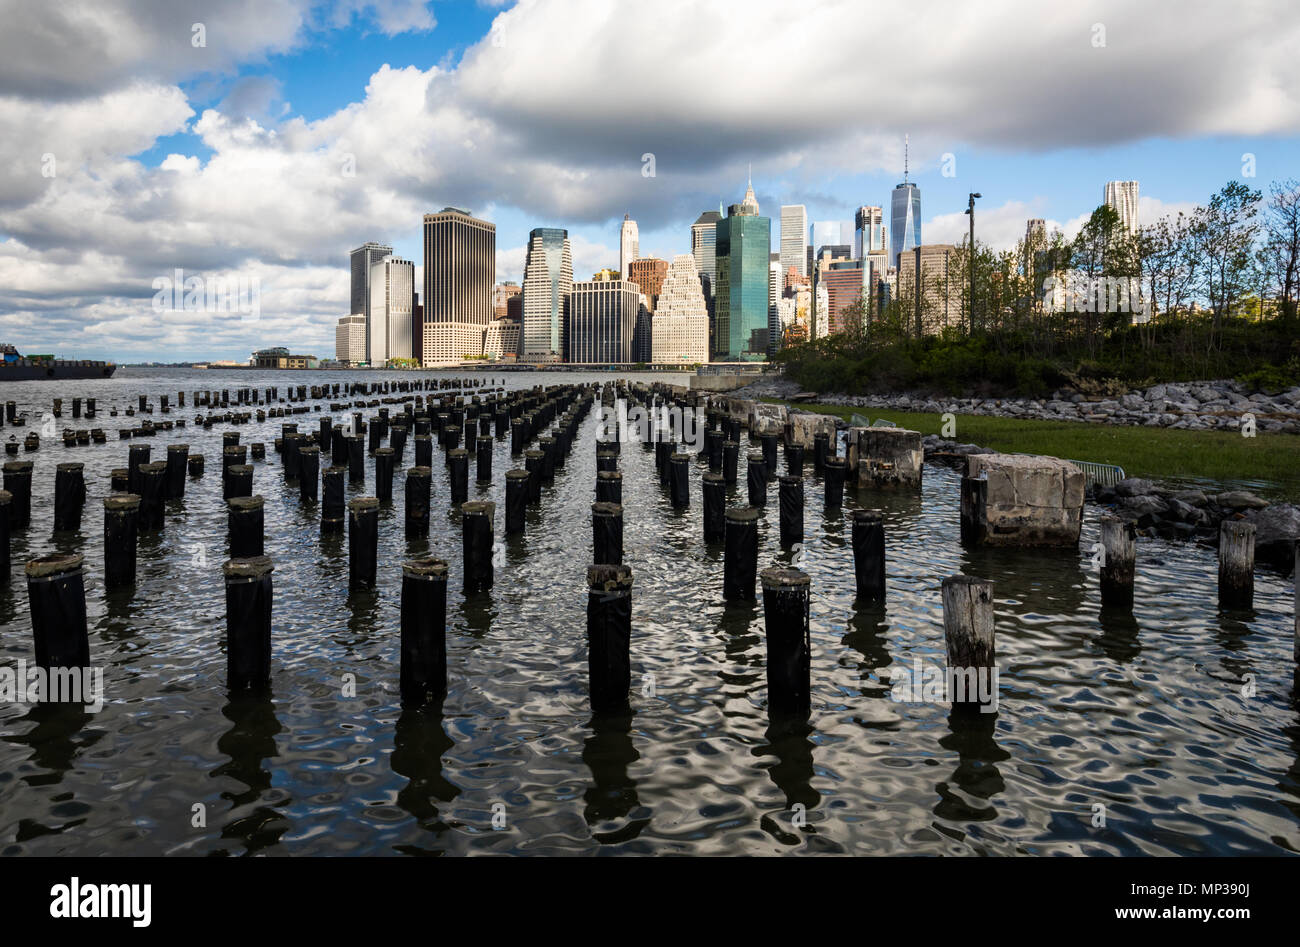 Manhattan skyline as seen from the East River docks in New York City, USA. Stock Photo